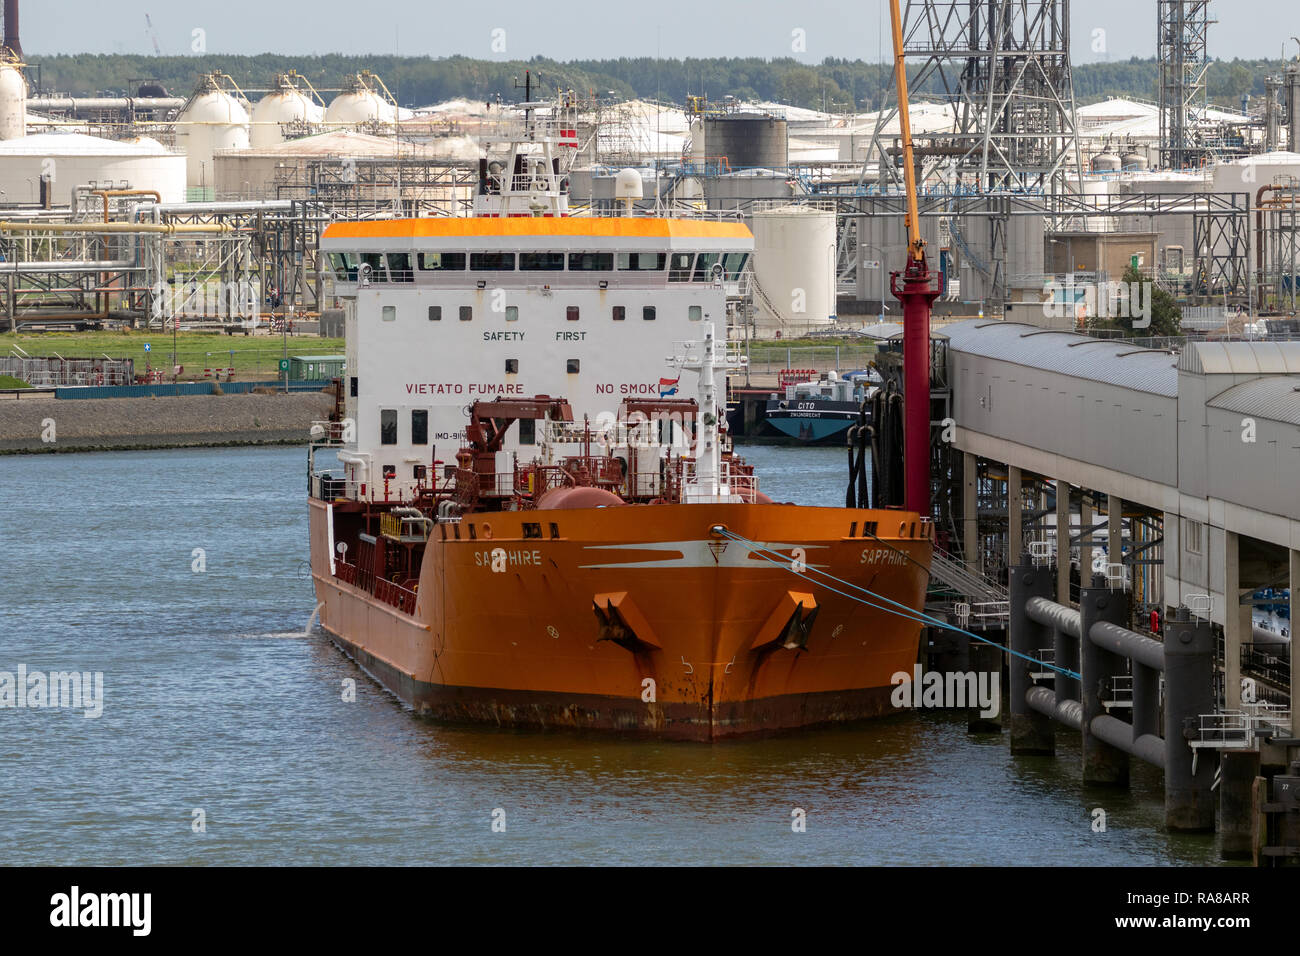 ROTTERDAM, THE NETHERLANDS - SEP 9, 2018: Oil tanker moored at the Vopak tank terminal in the Port of Rotterdam. Stock Photo